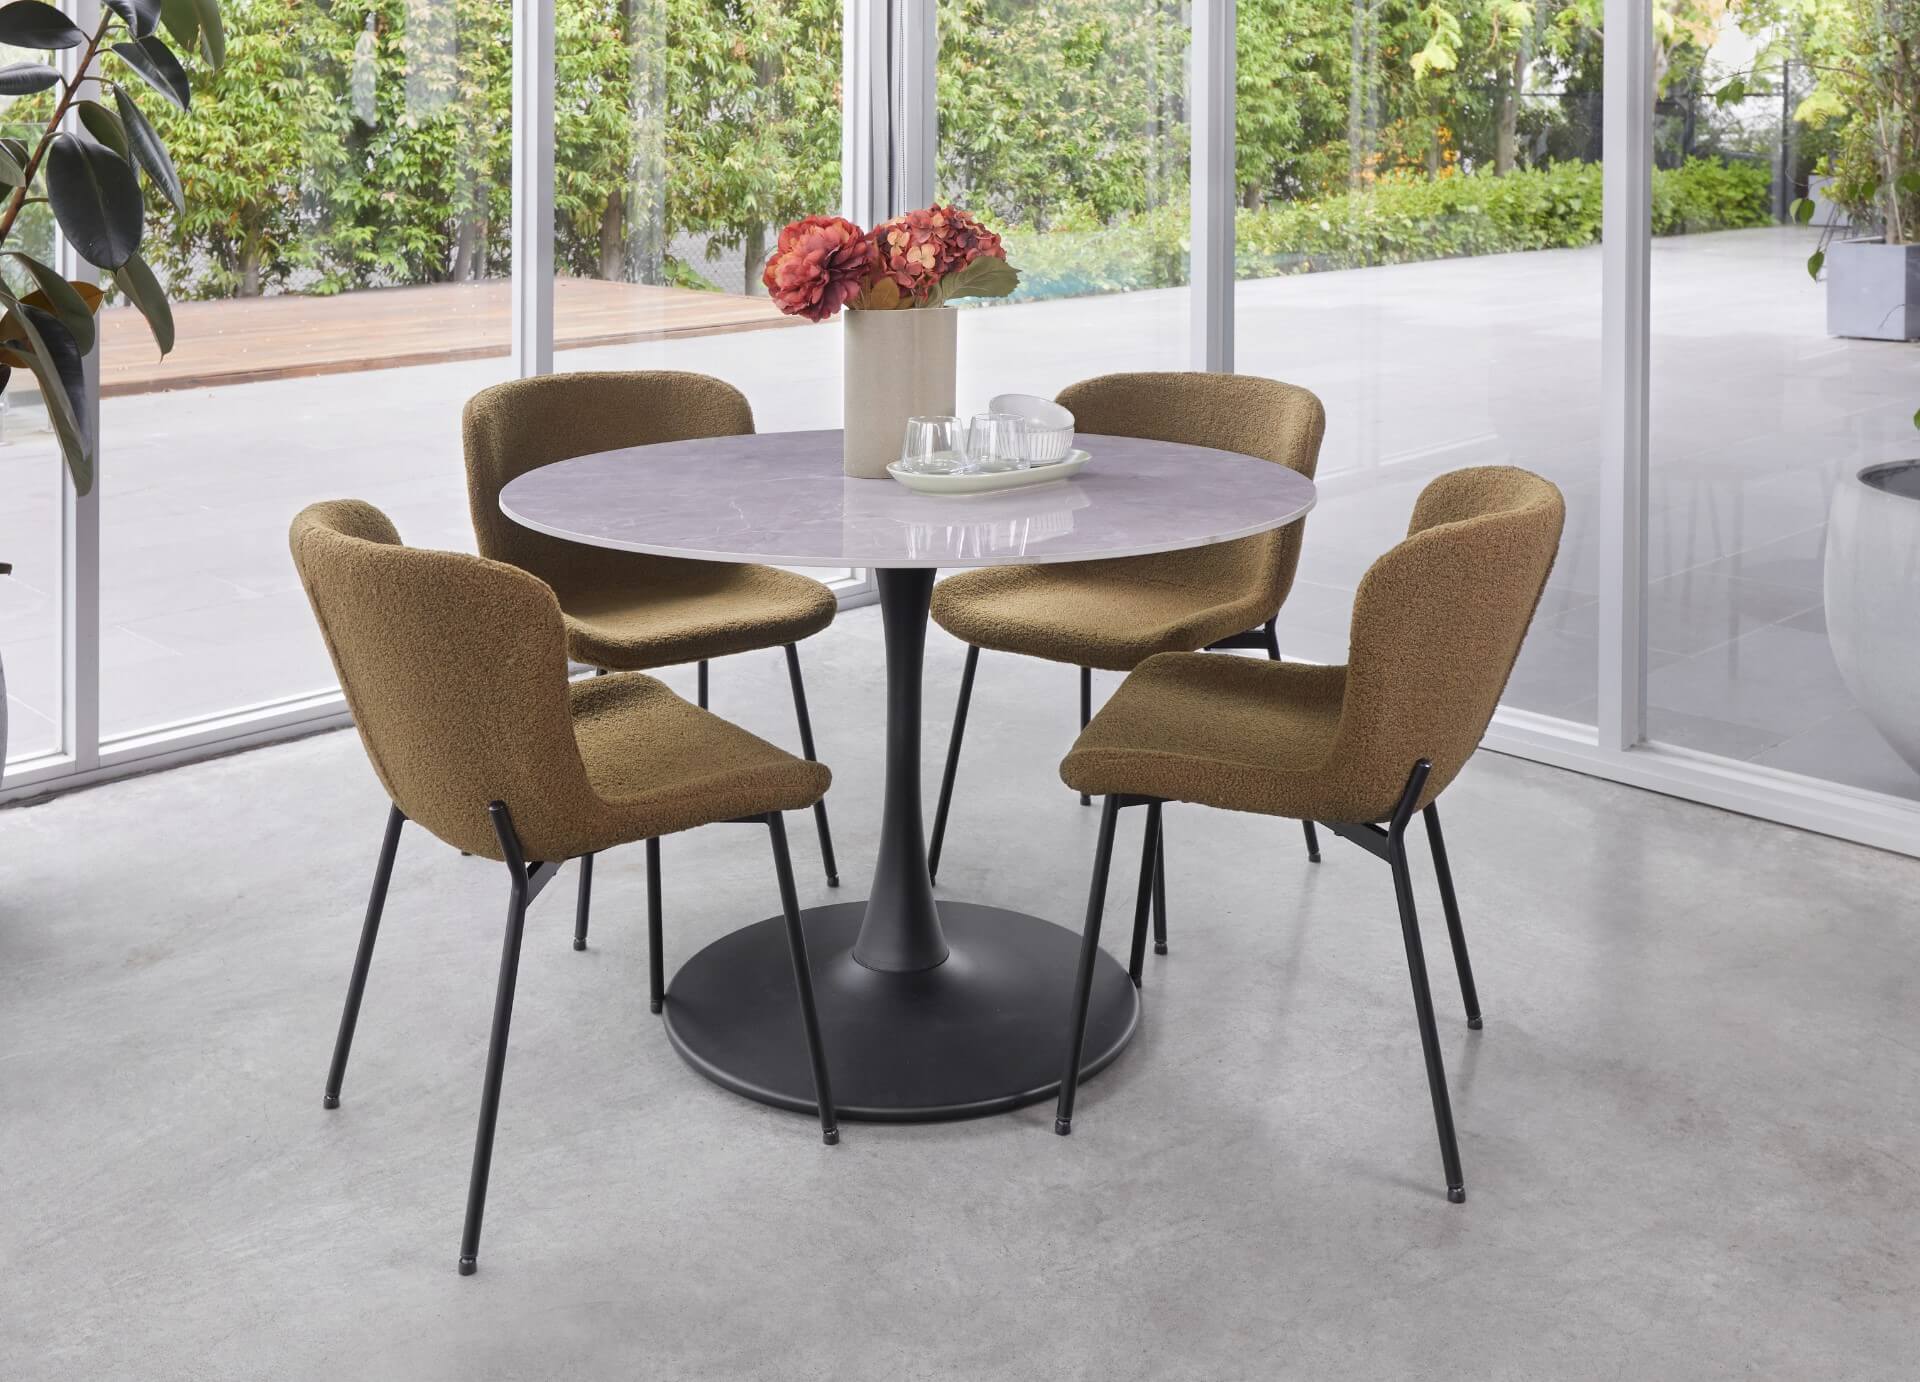 Andre | Metal Scratch Resistant Polished Ceramic 4 Seater Round Dining Table | Grey